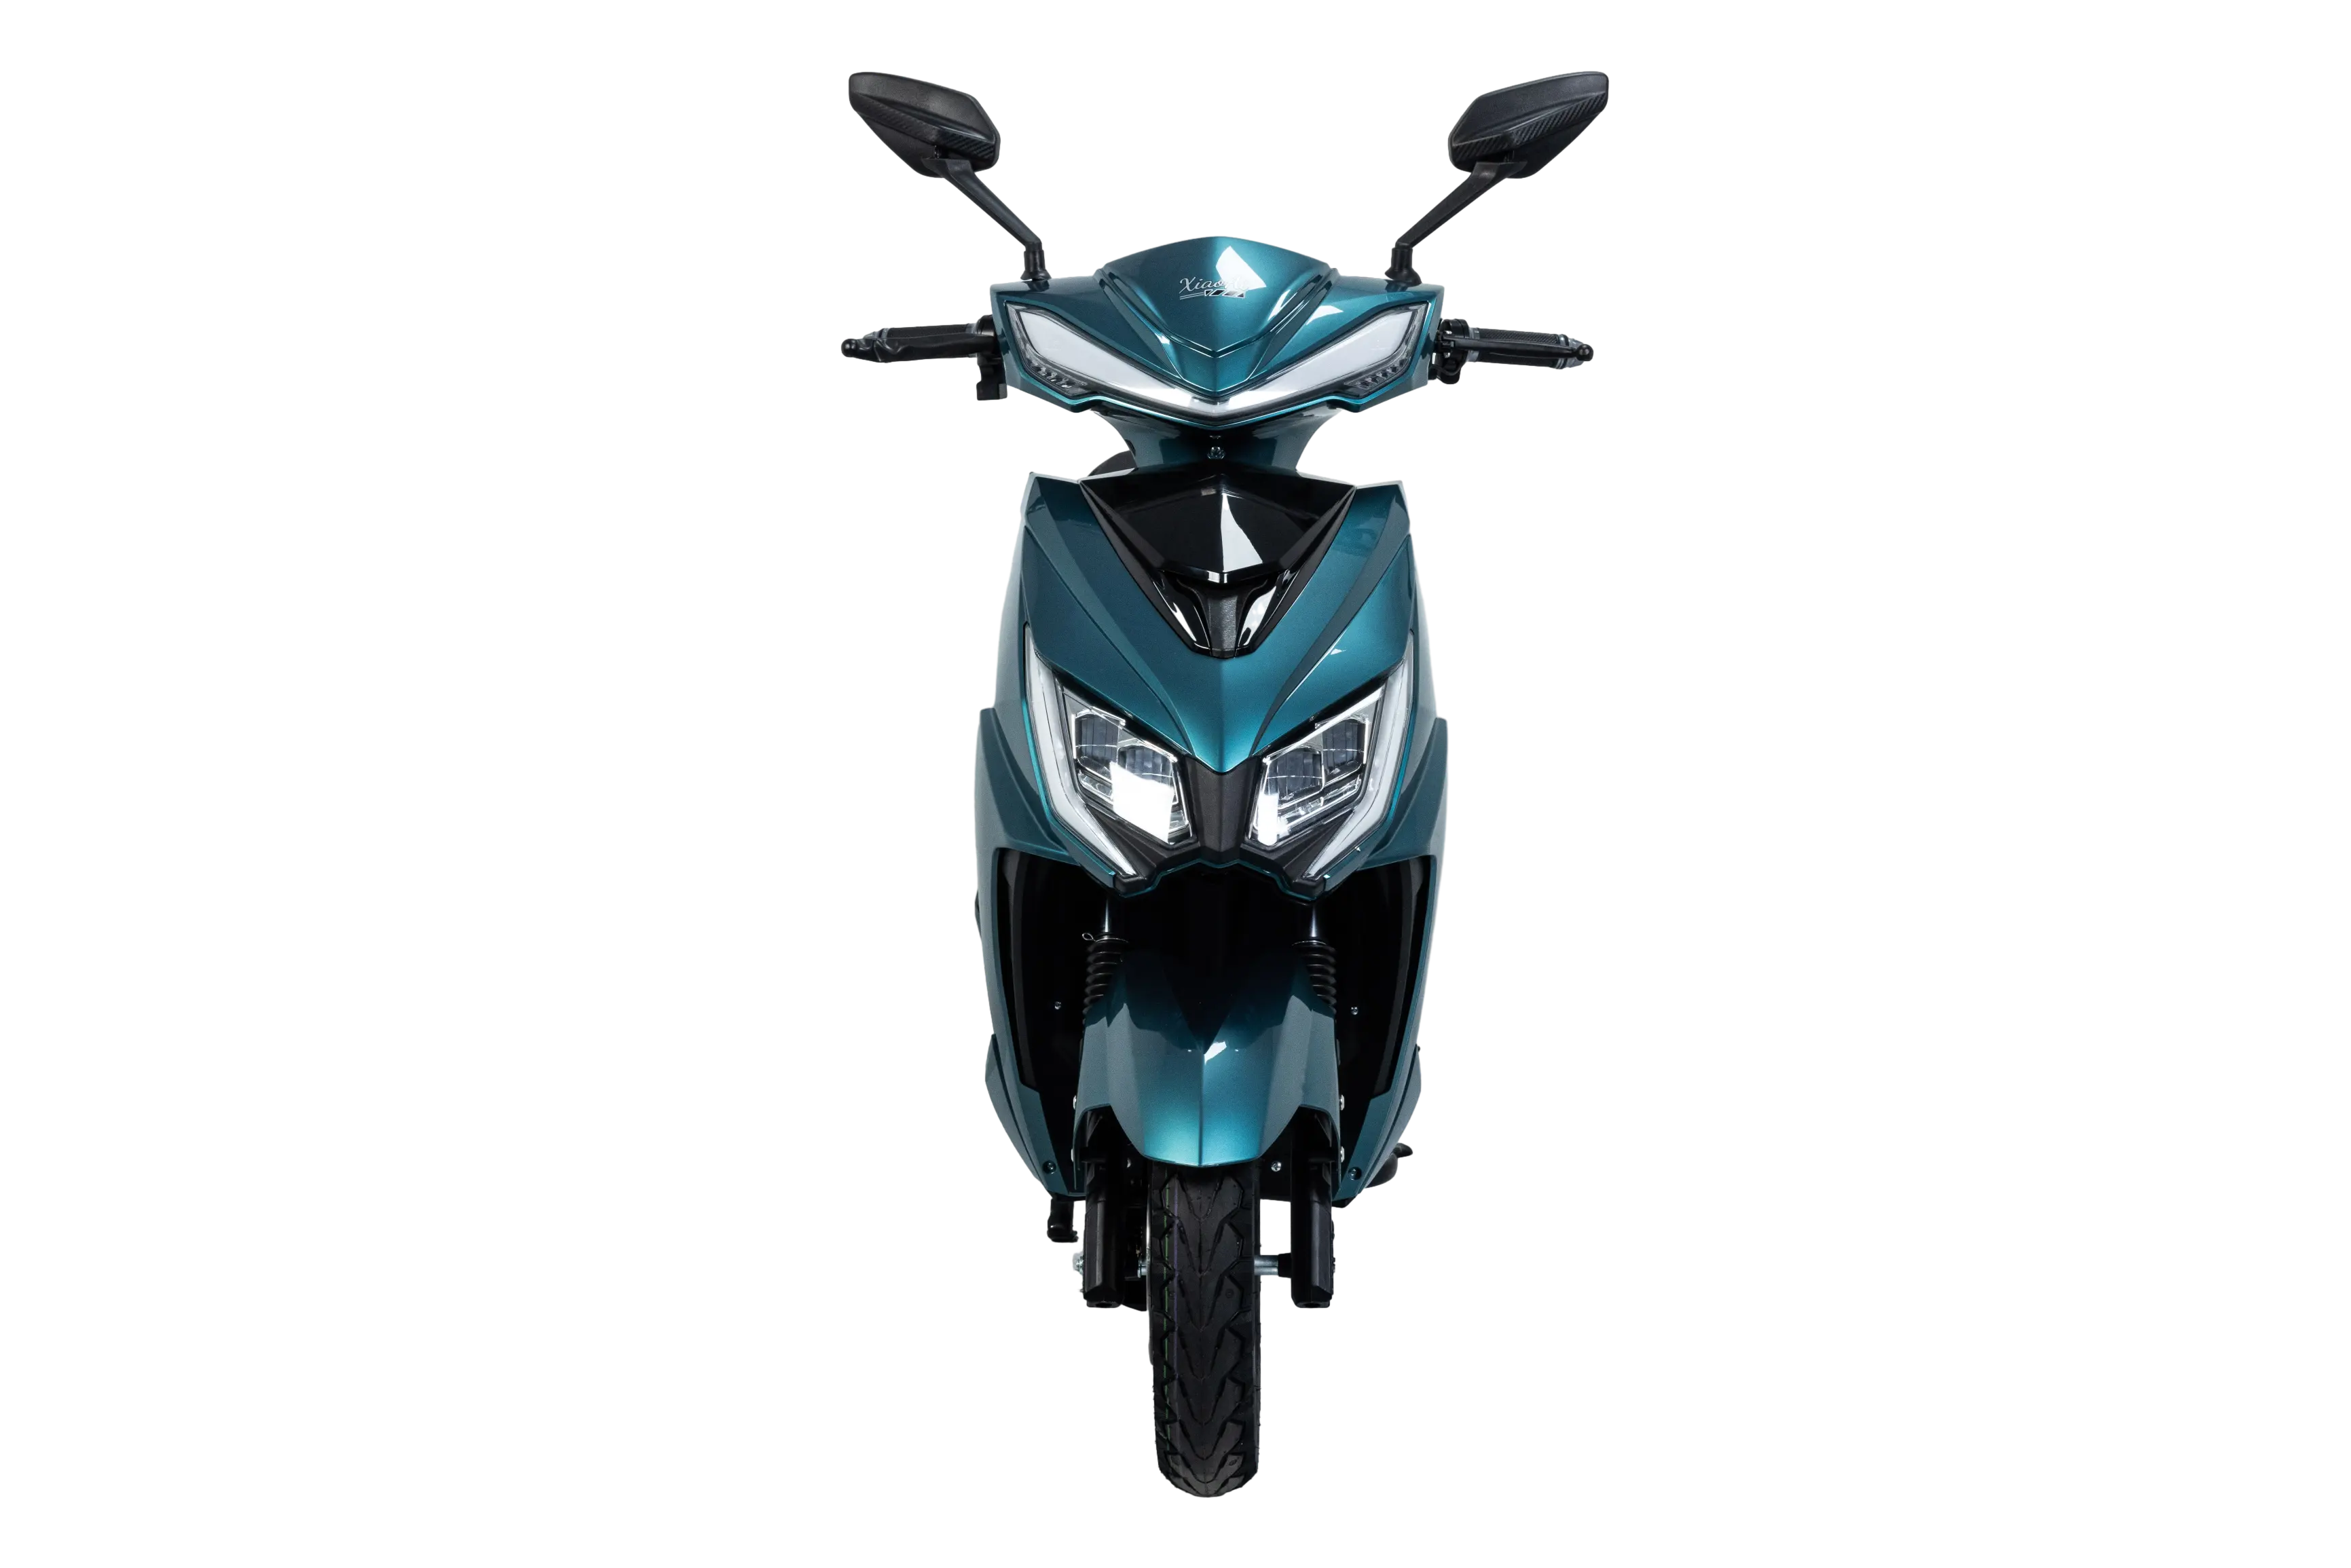 Wholesale 125cc petrol motorcycles with a speed of 80 km/h